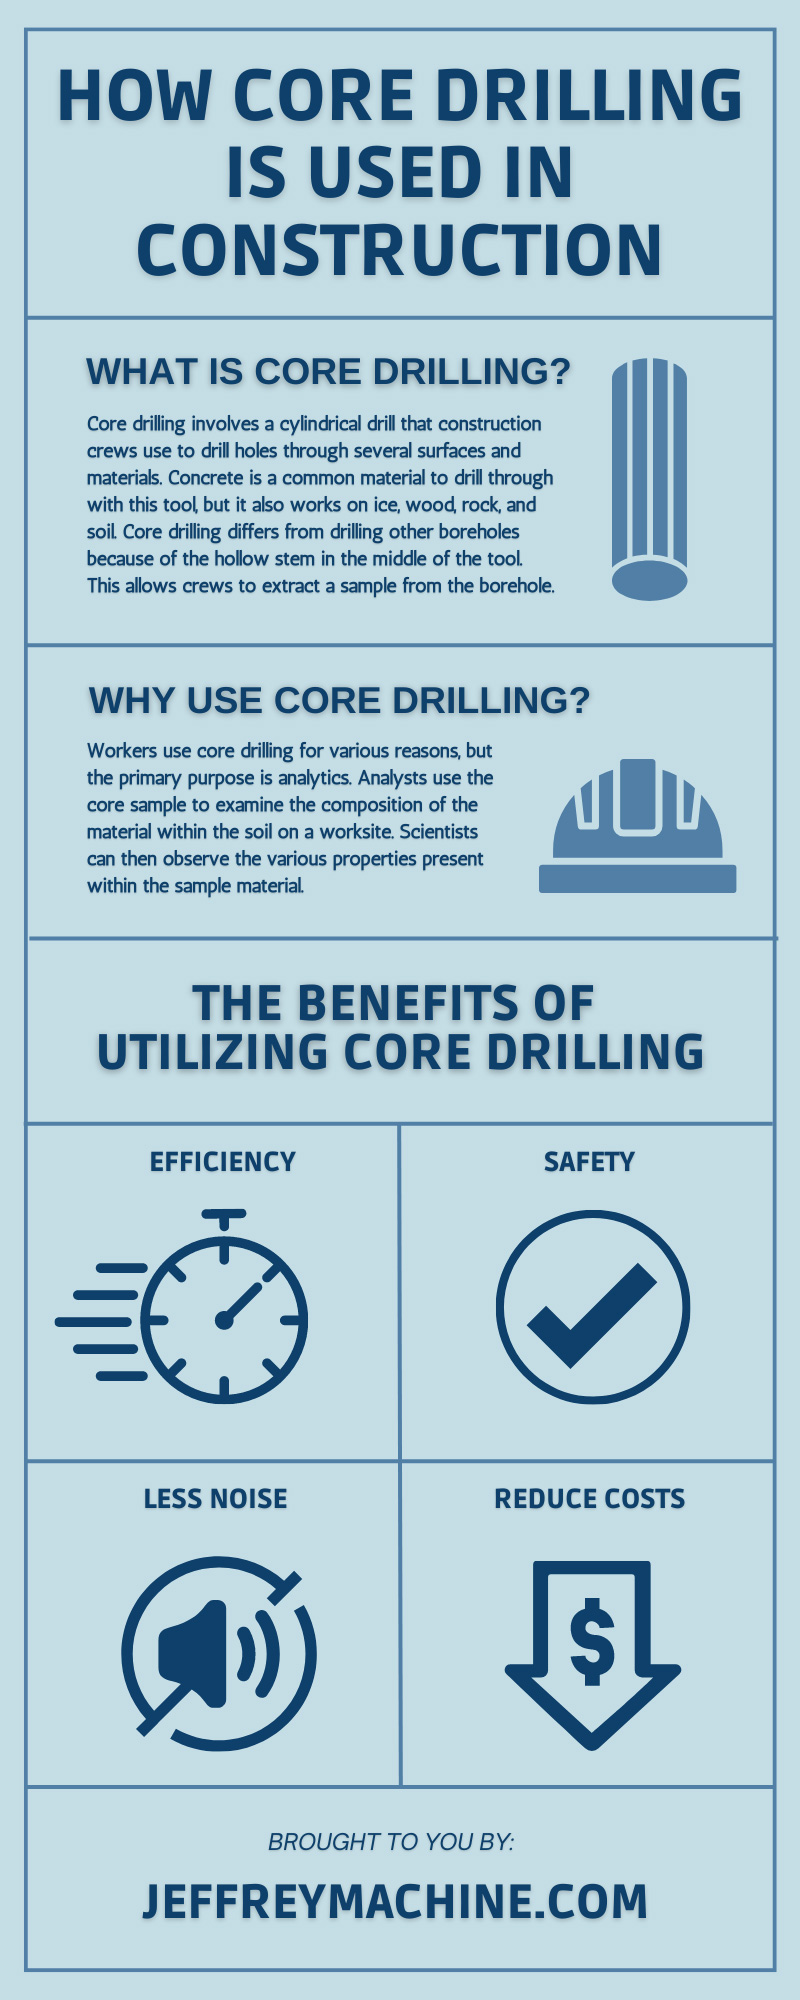 How Core Drilling Is Used in Construction
